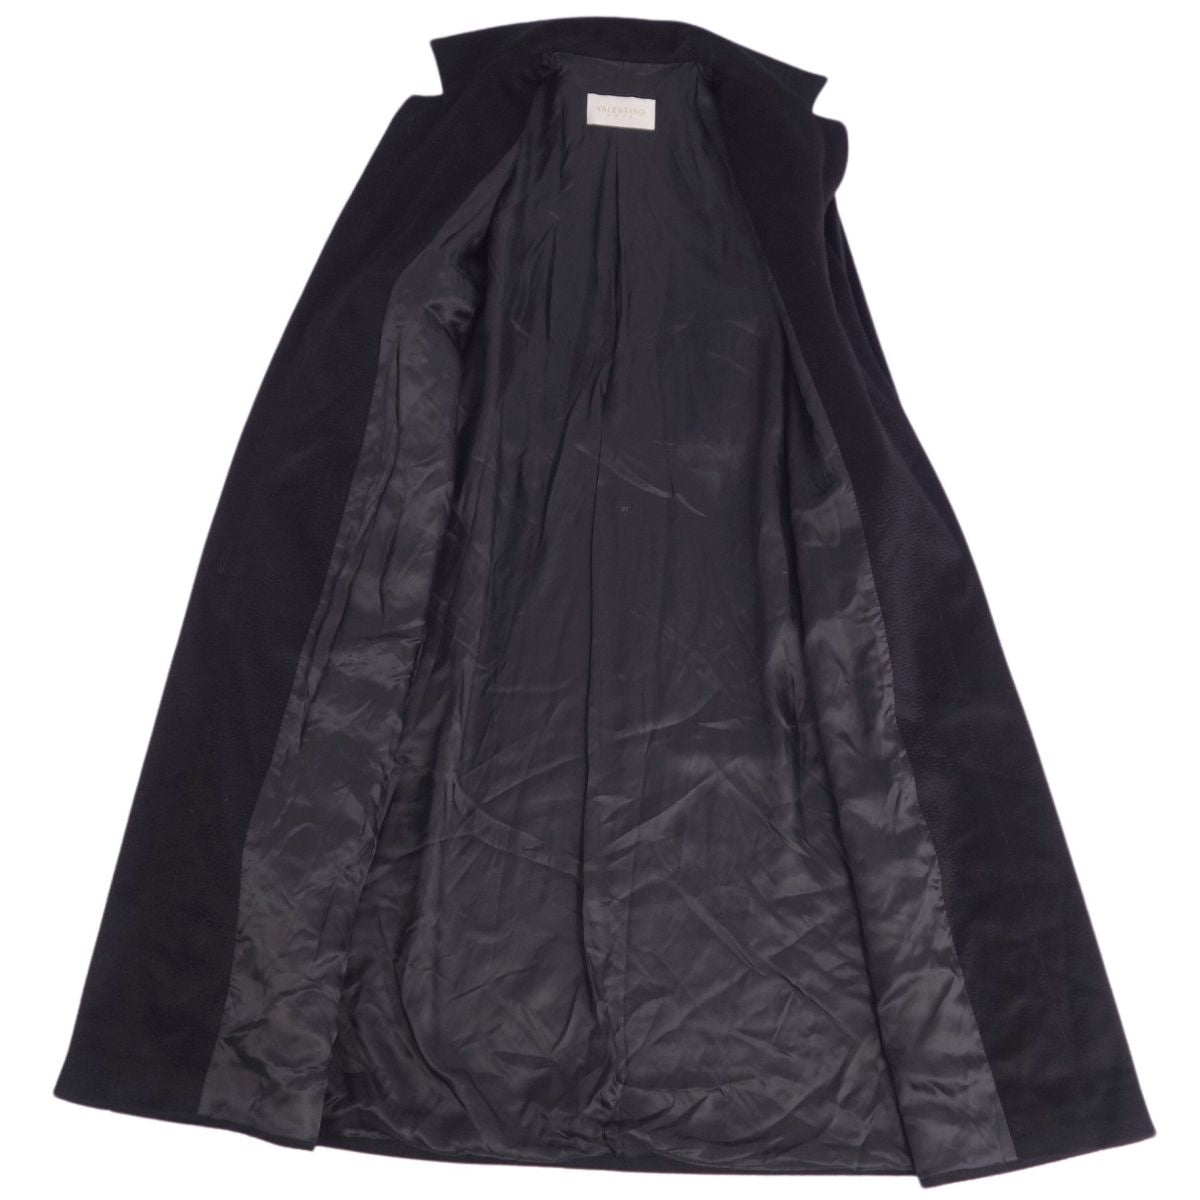 Valentino Long-coat 100% Out  42 (M equivalent) Black ()